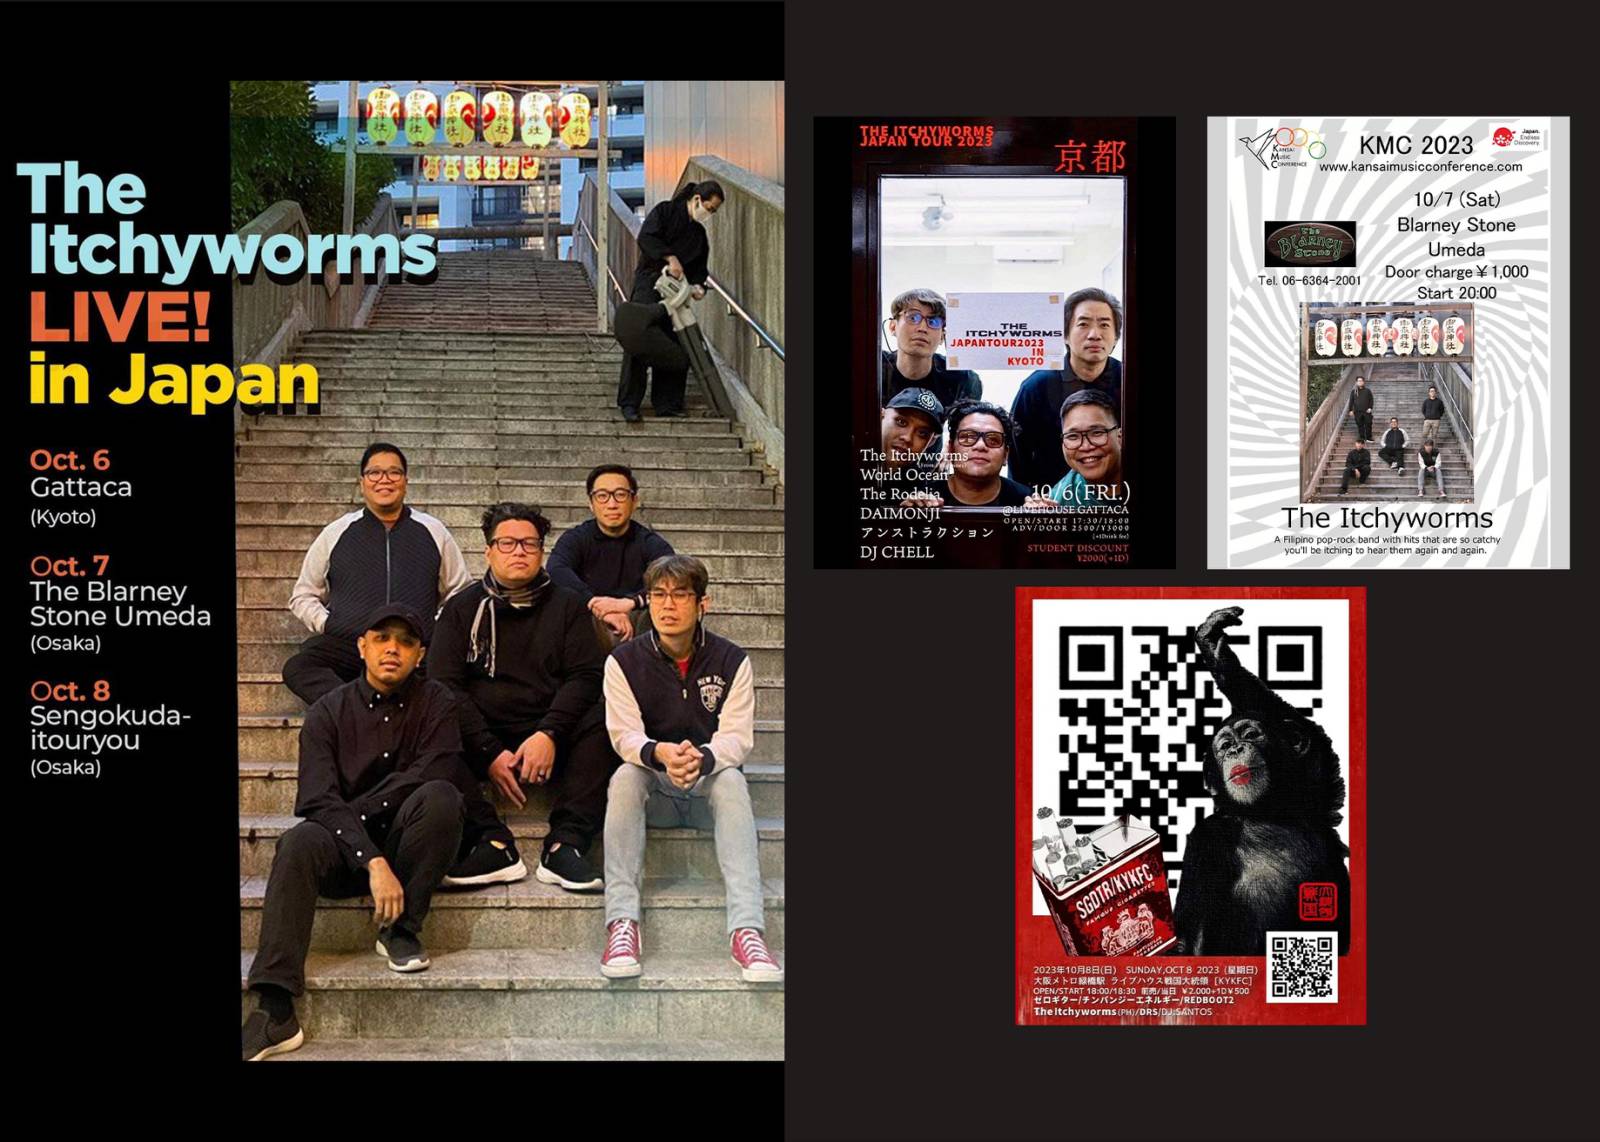 The Itchyworms to embark on a 3-city tour in Japan next month!